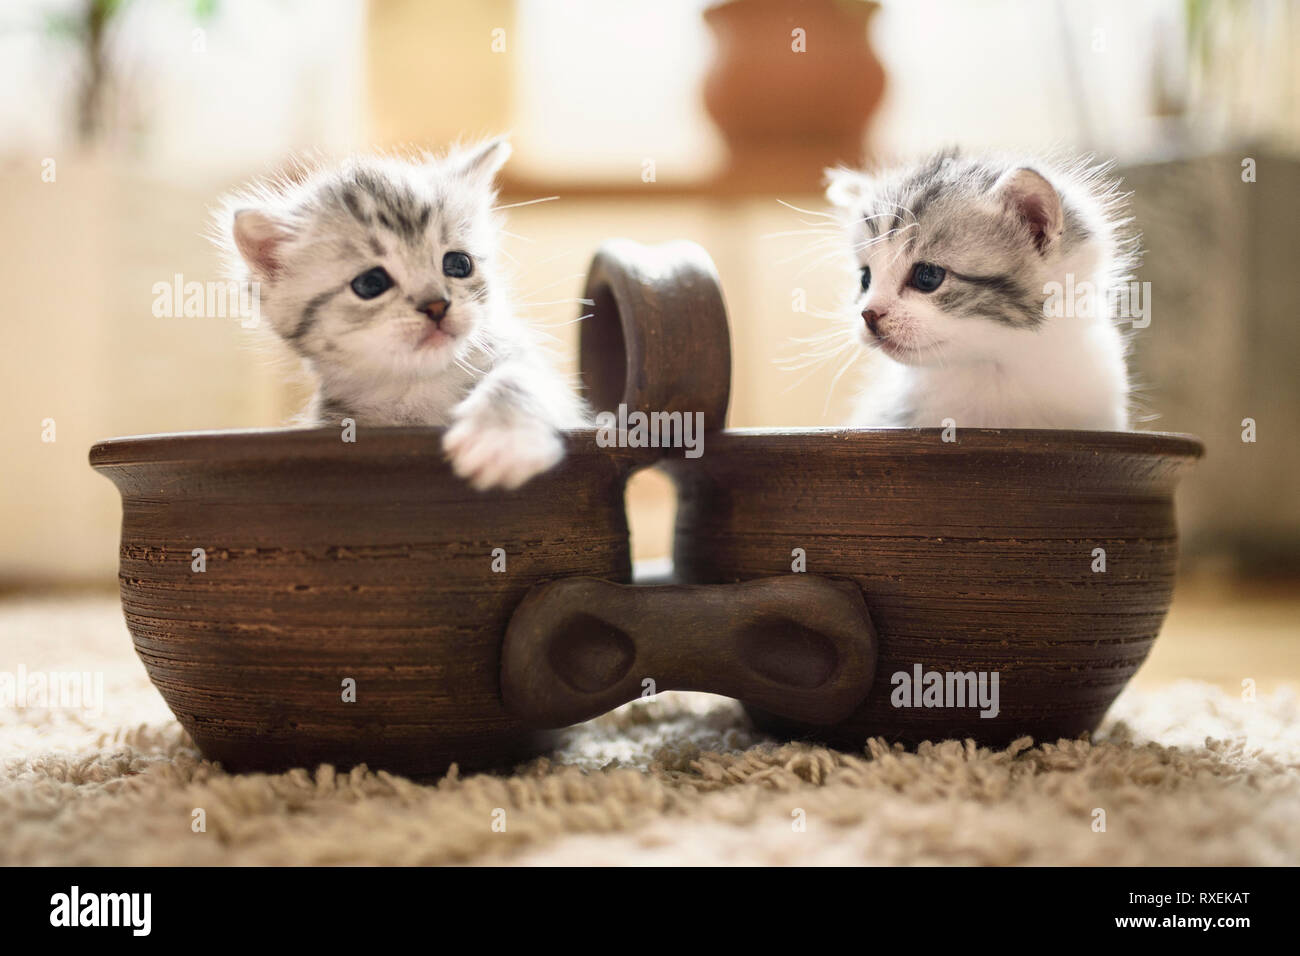 Adorable two kittens are sitting in flowerpot and look curious in different sides. Stock Photo